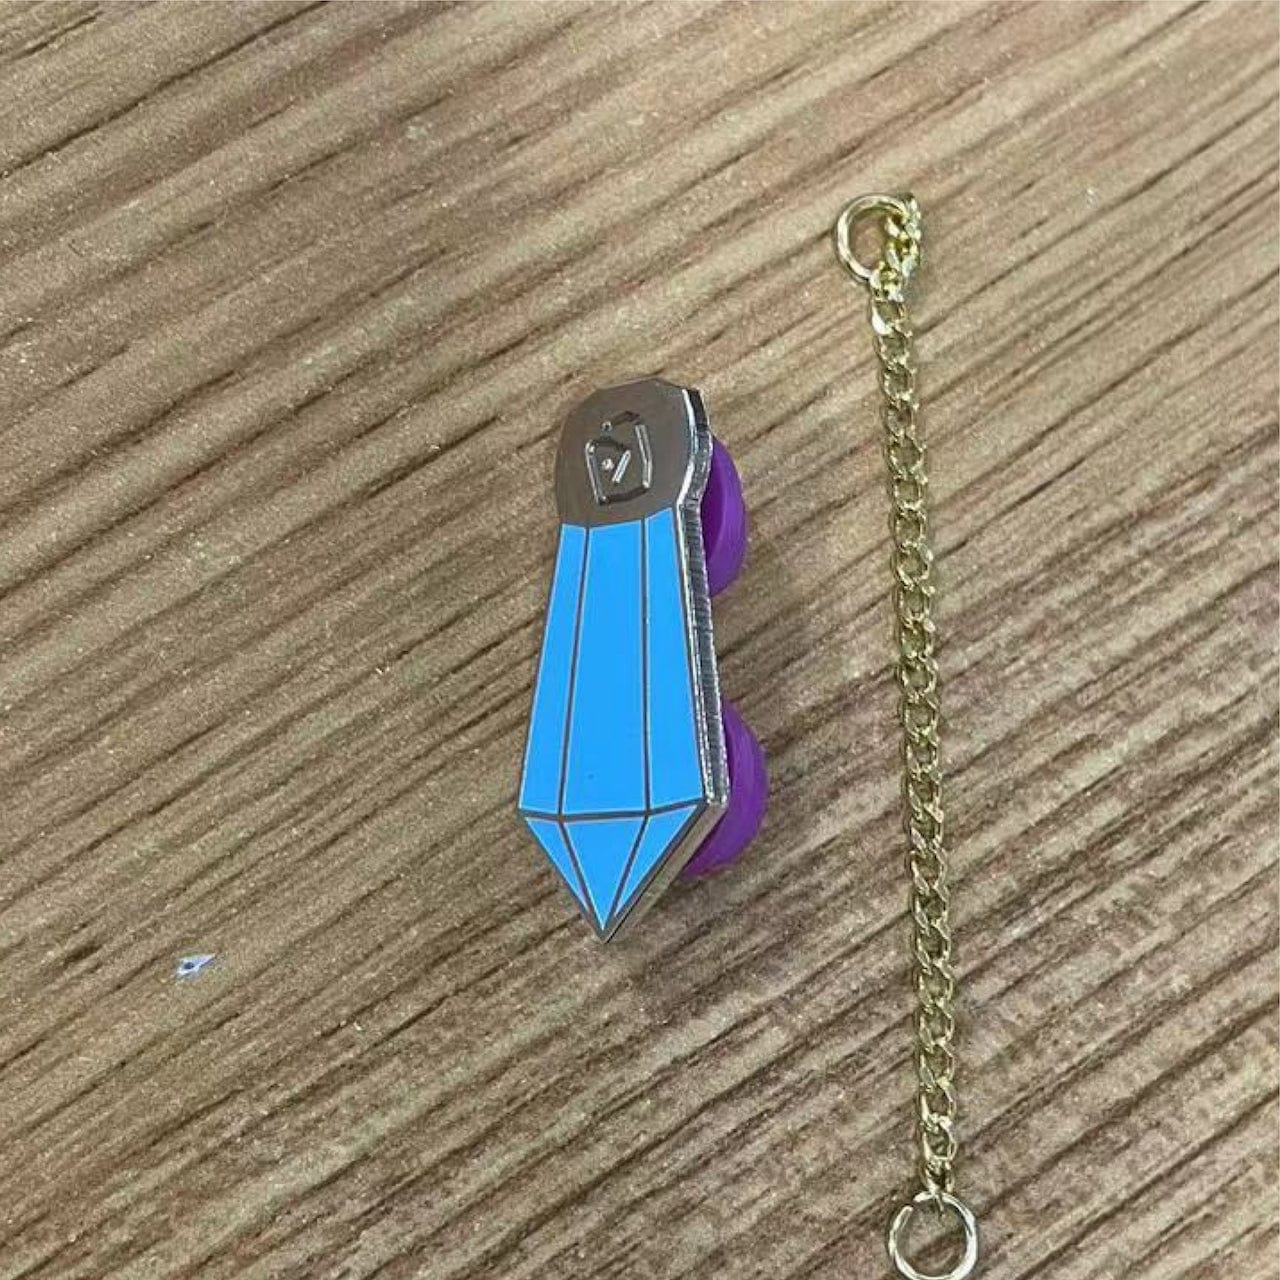 Pinbuds Enamel pin Lost princess Atlantis crystal pin (glow in the dark and includes detachable chain)